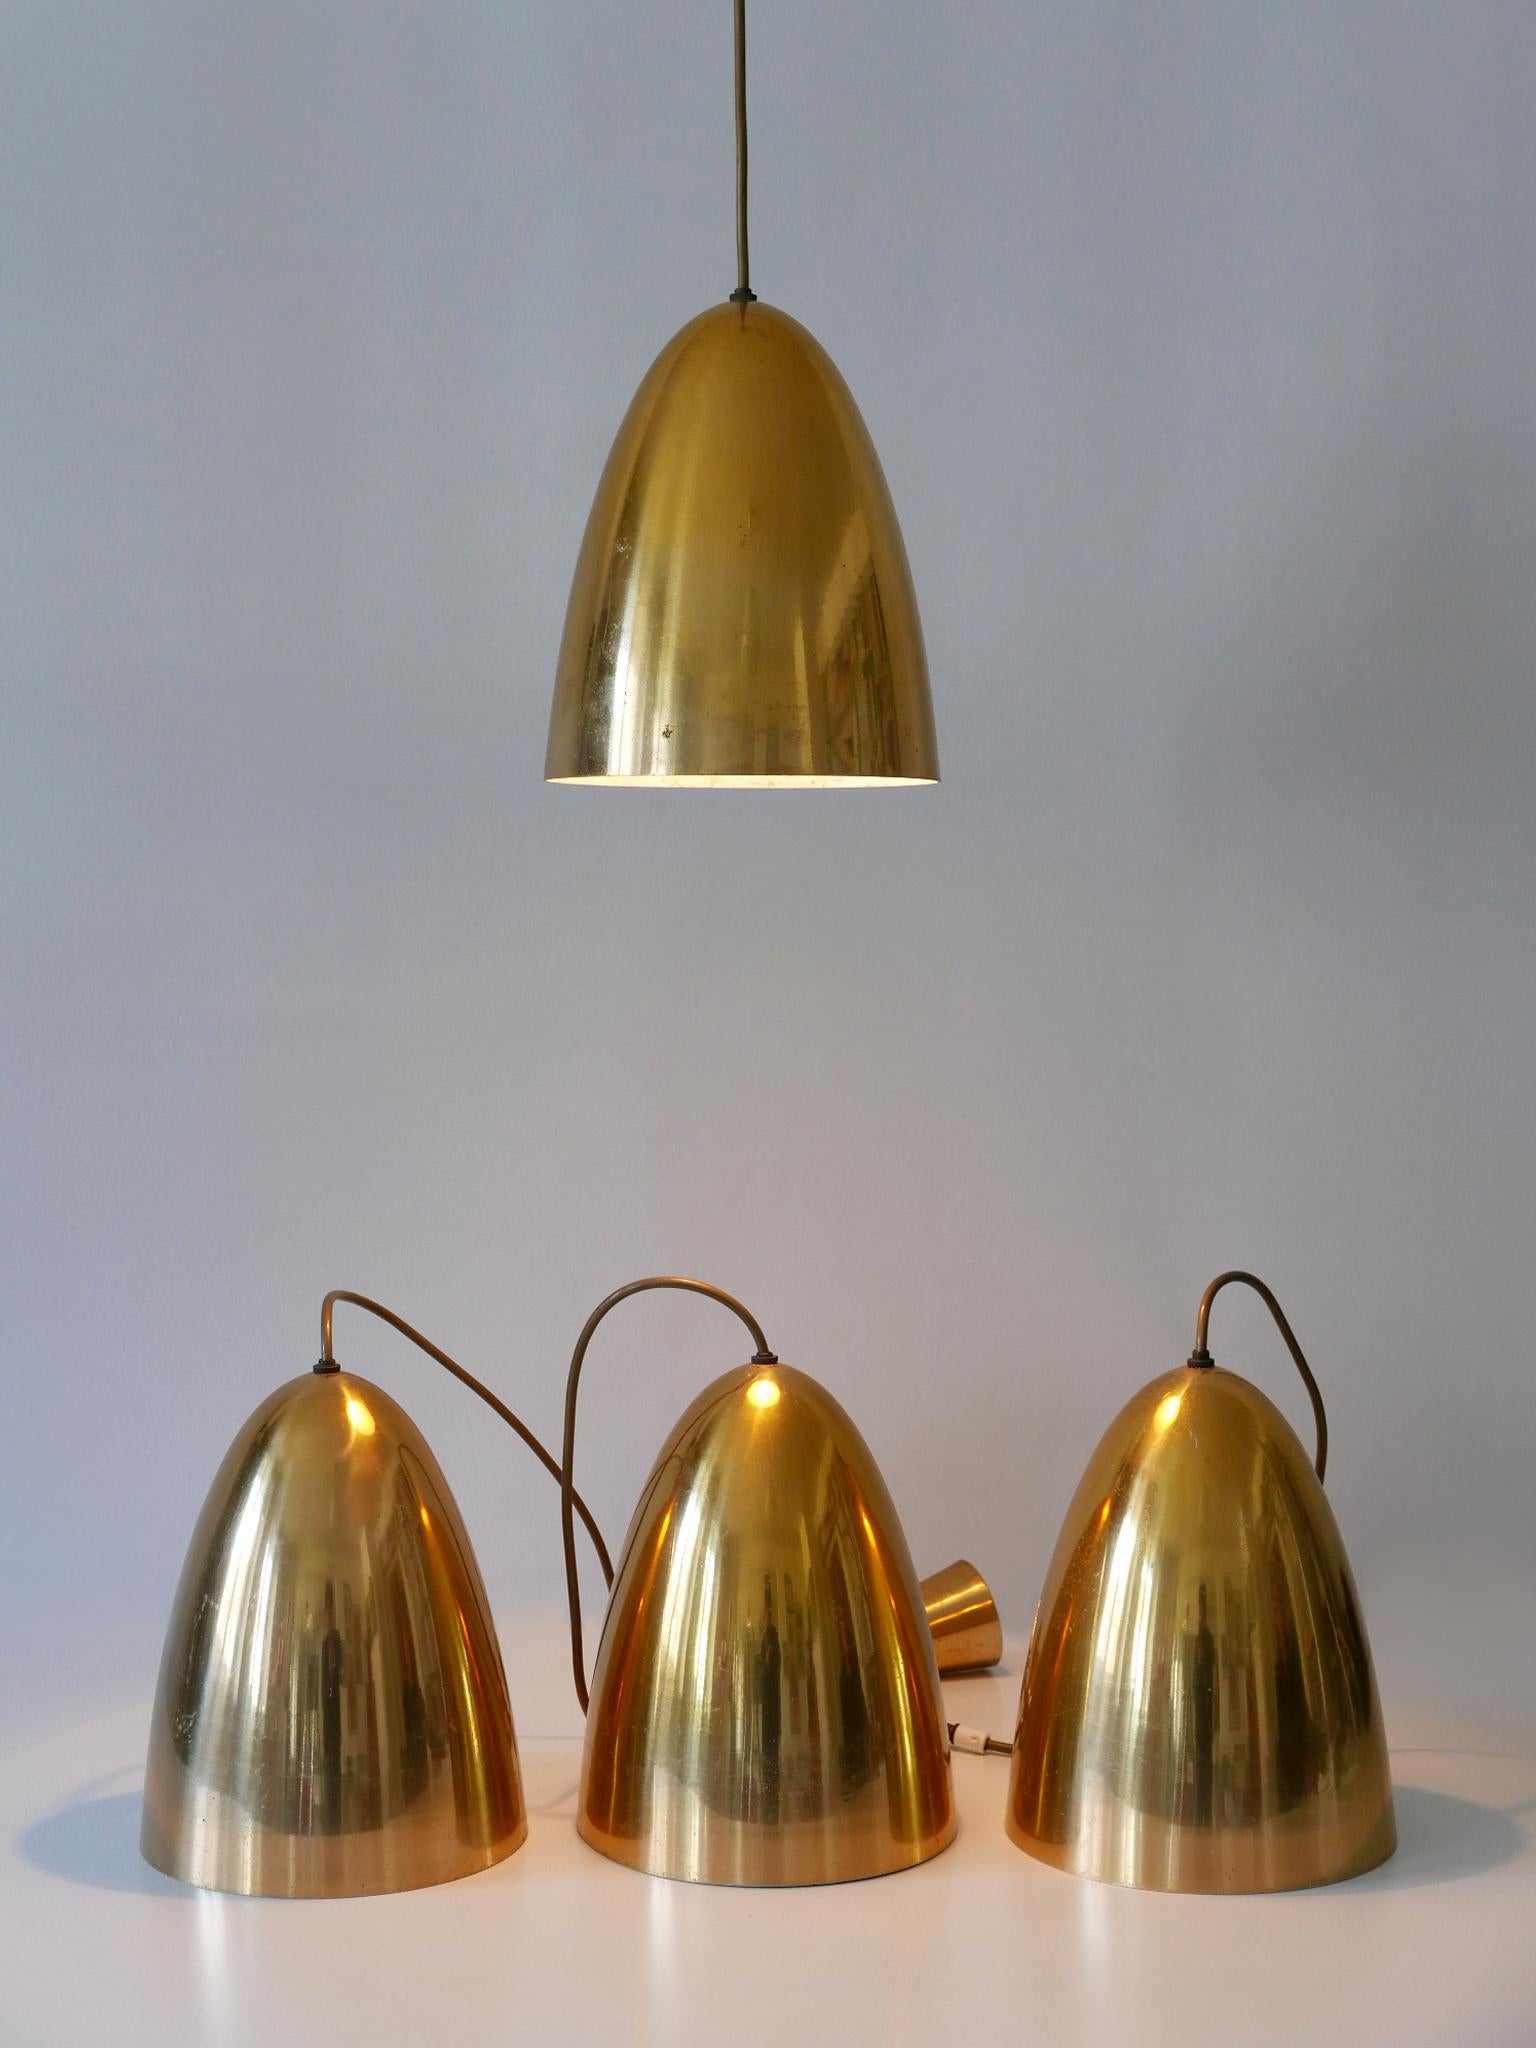 1 of 4 Elegant Mid Century Modern Pendant Lamps or Hanging Lights Germany 1950s For Sale 4